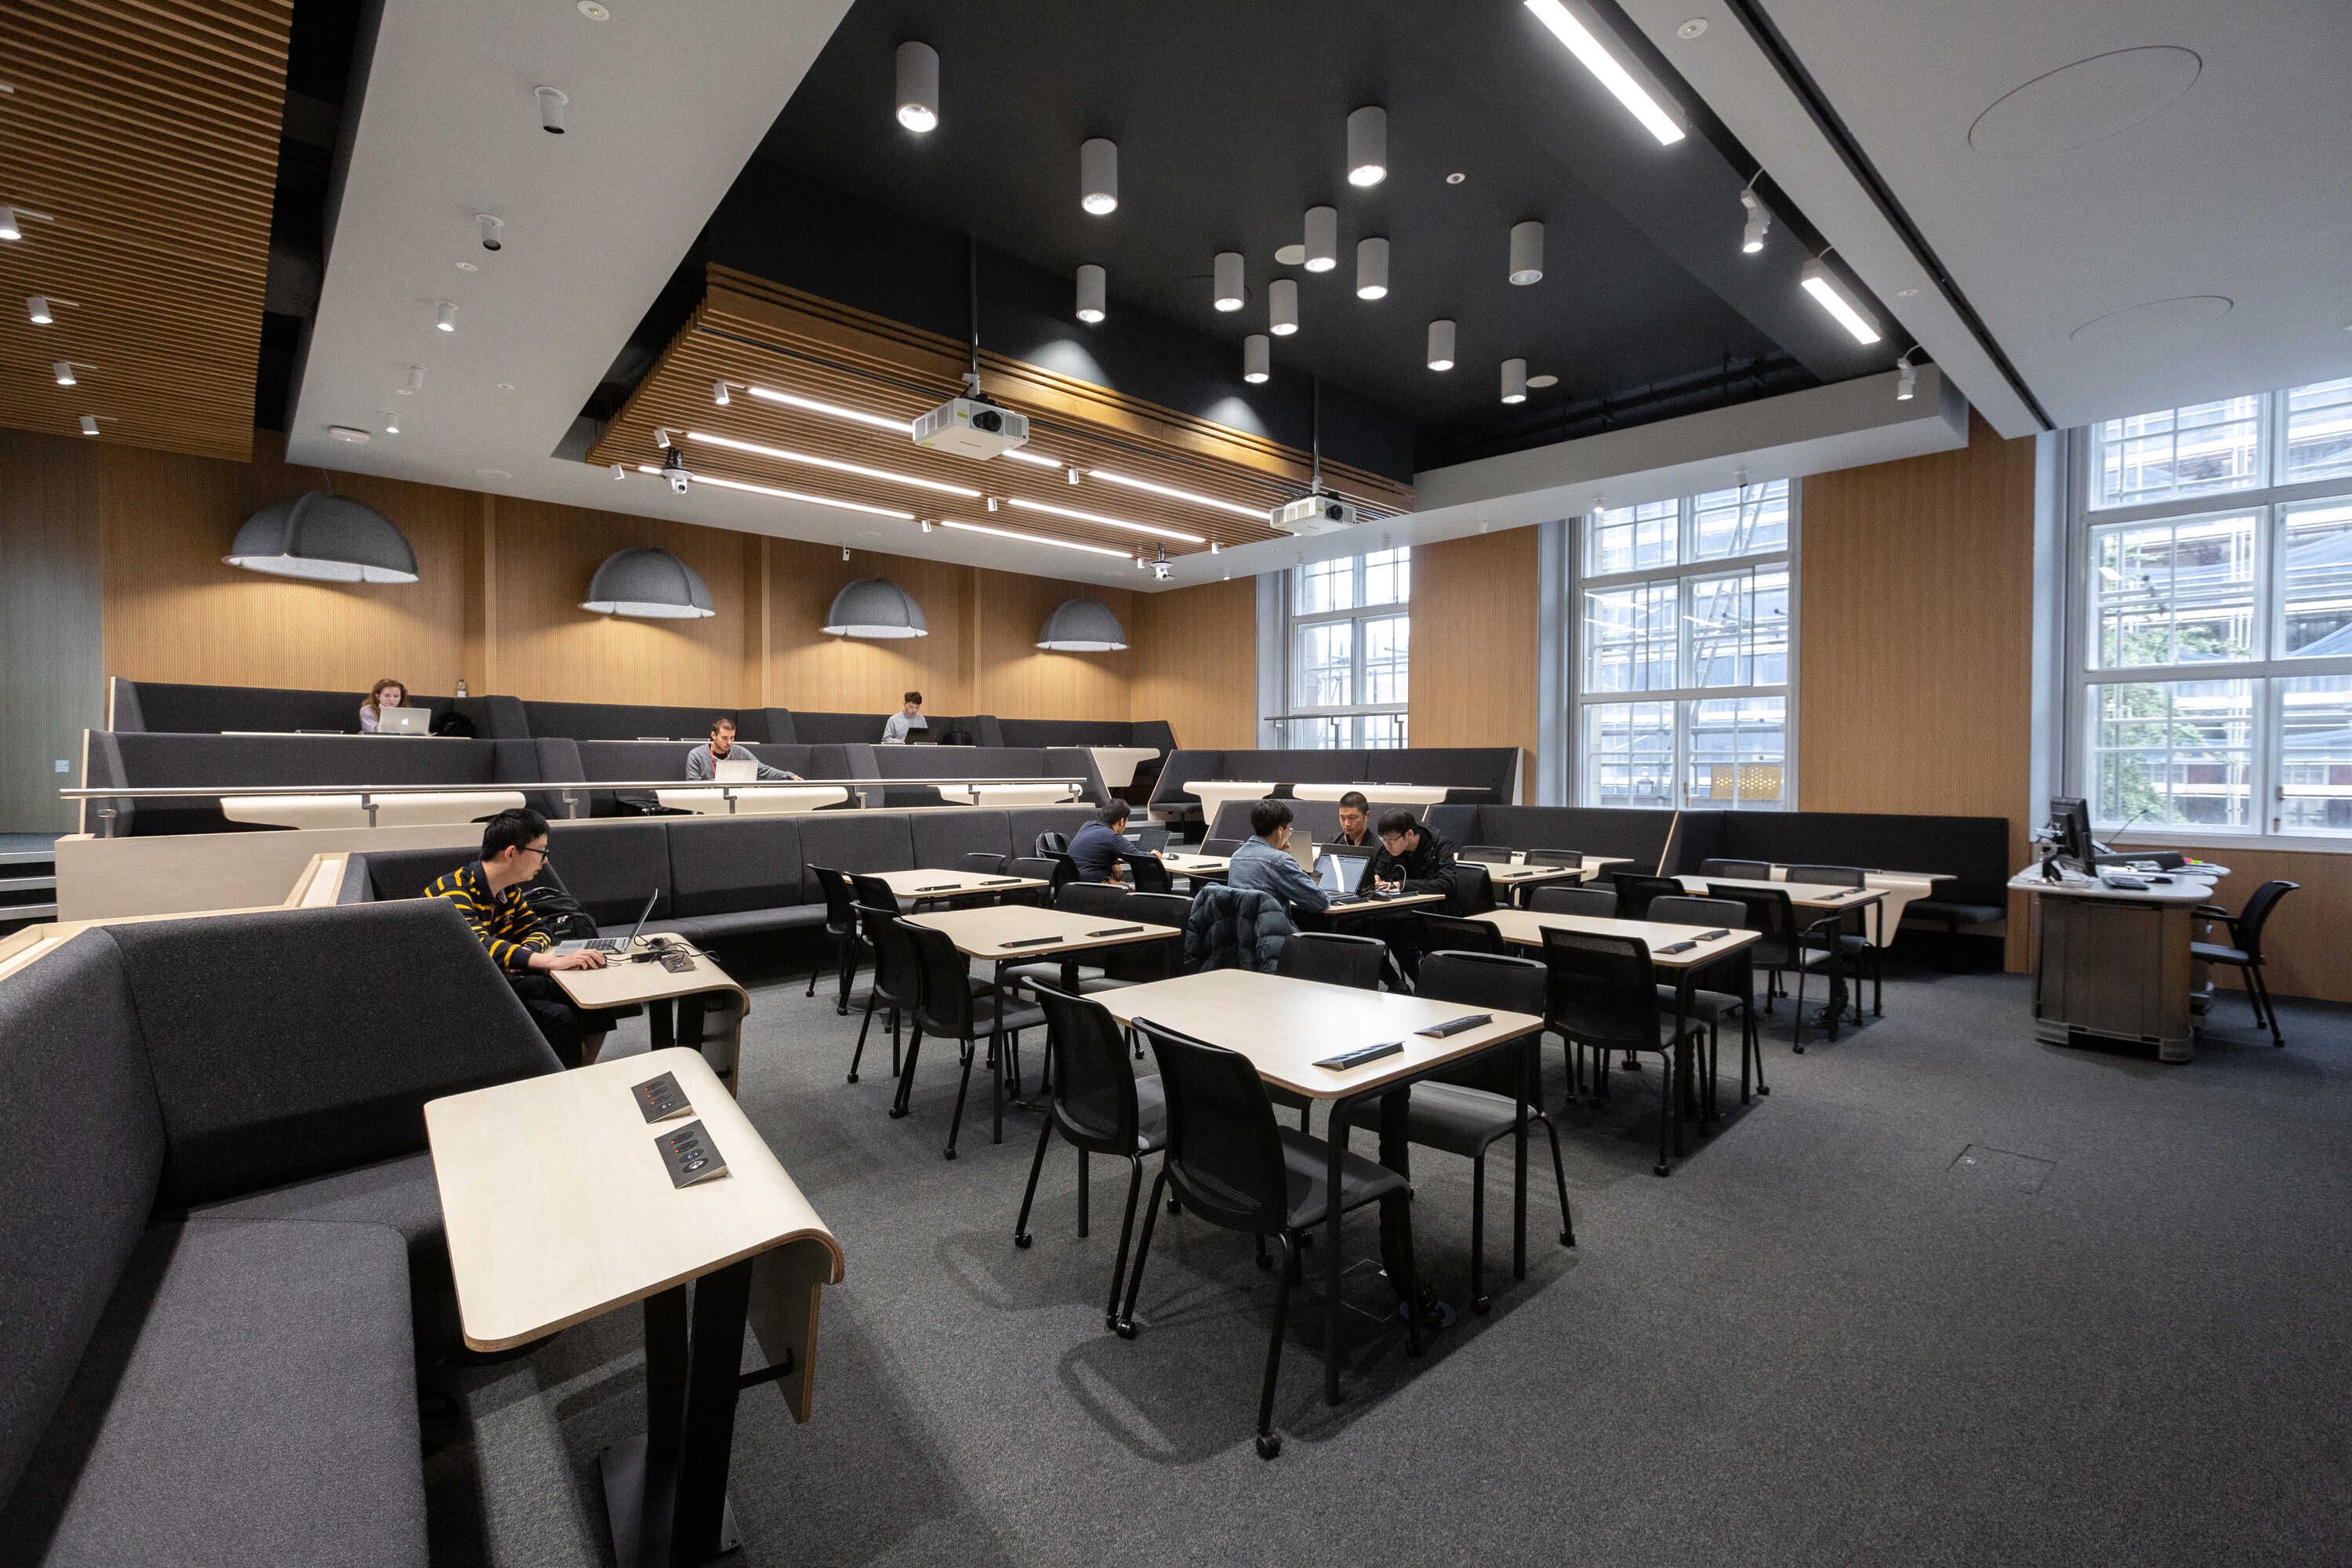 The newly refurbished Royal School of Mines lecture Theatre 1.47